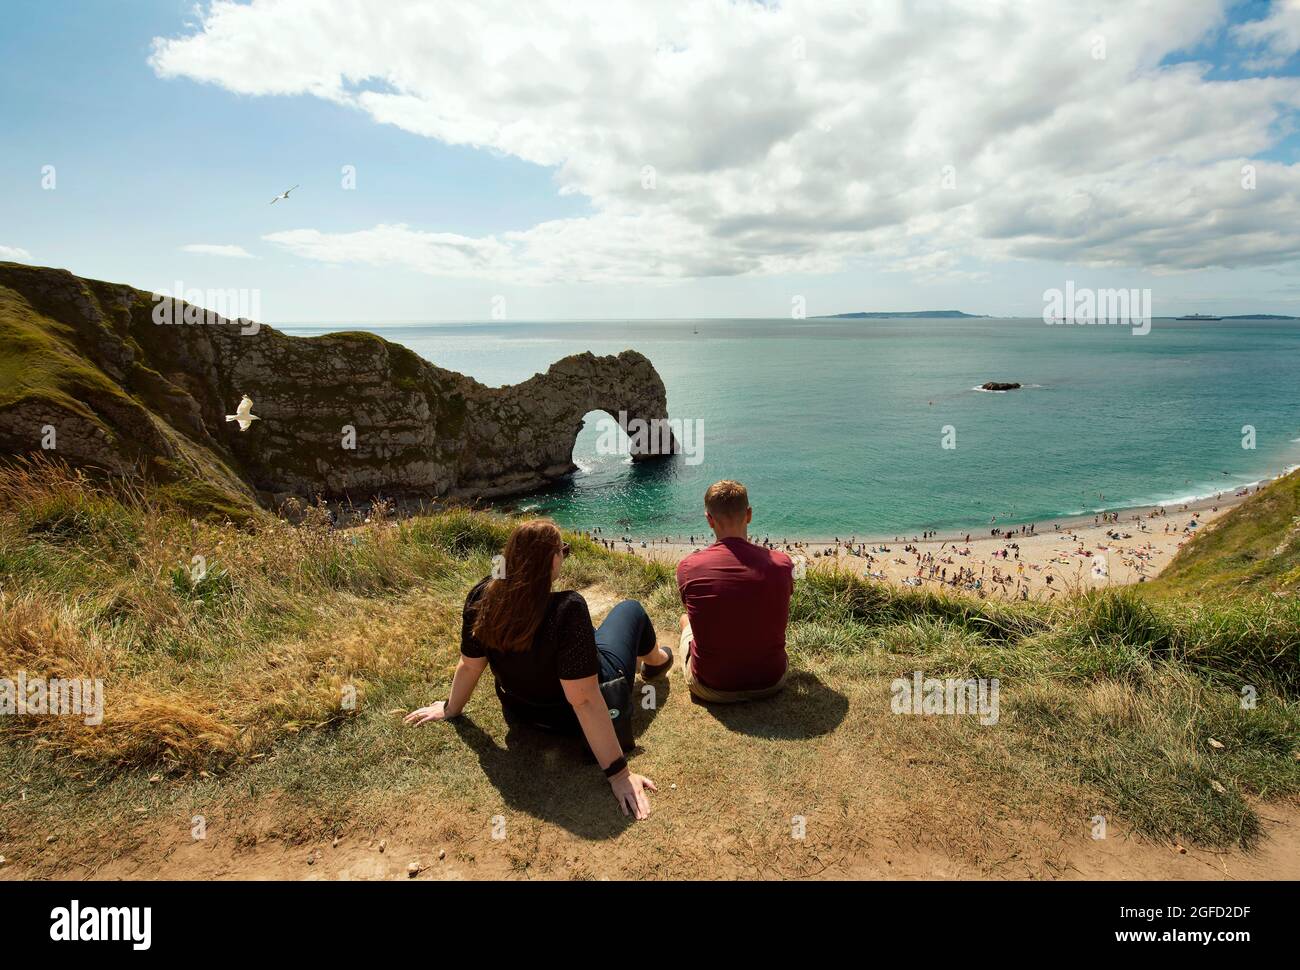 Durdle Door, the Jurassic Coast’s most iconic landscape with its natural limestone arch. Young couple enjoying a sunny Sunday. Dorset, UK. 22 Aug 2021 Stock Photo